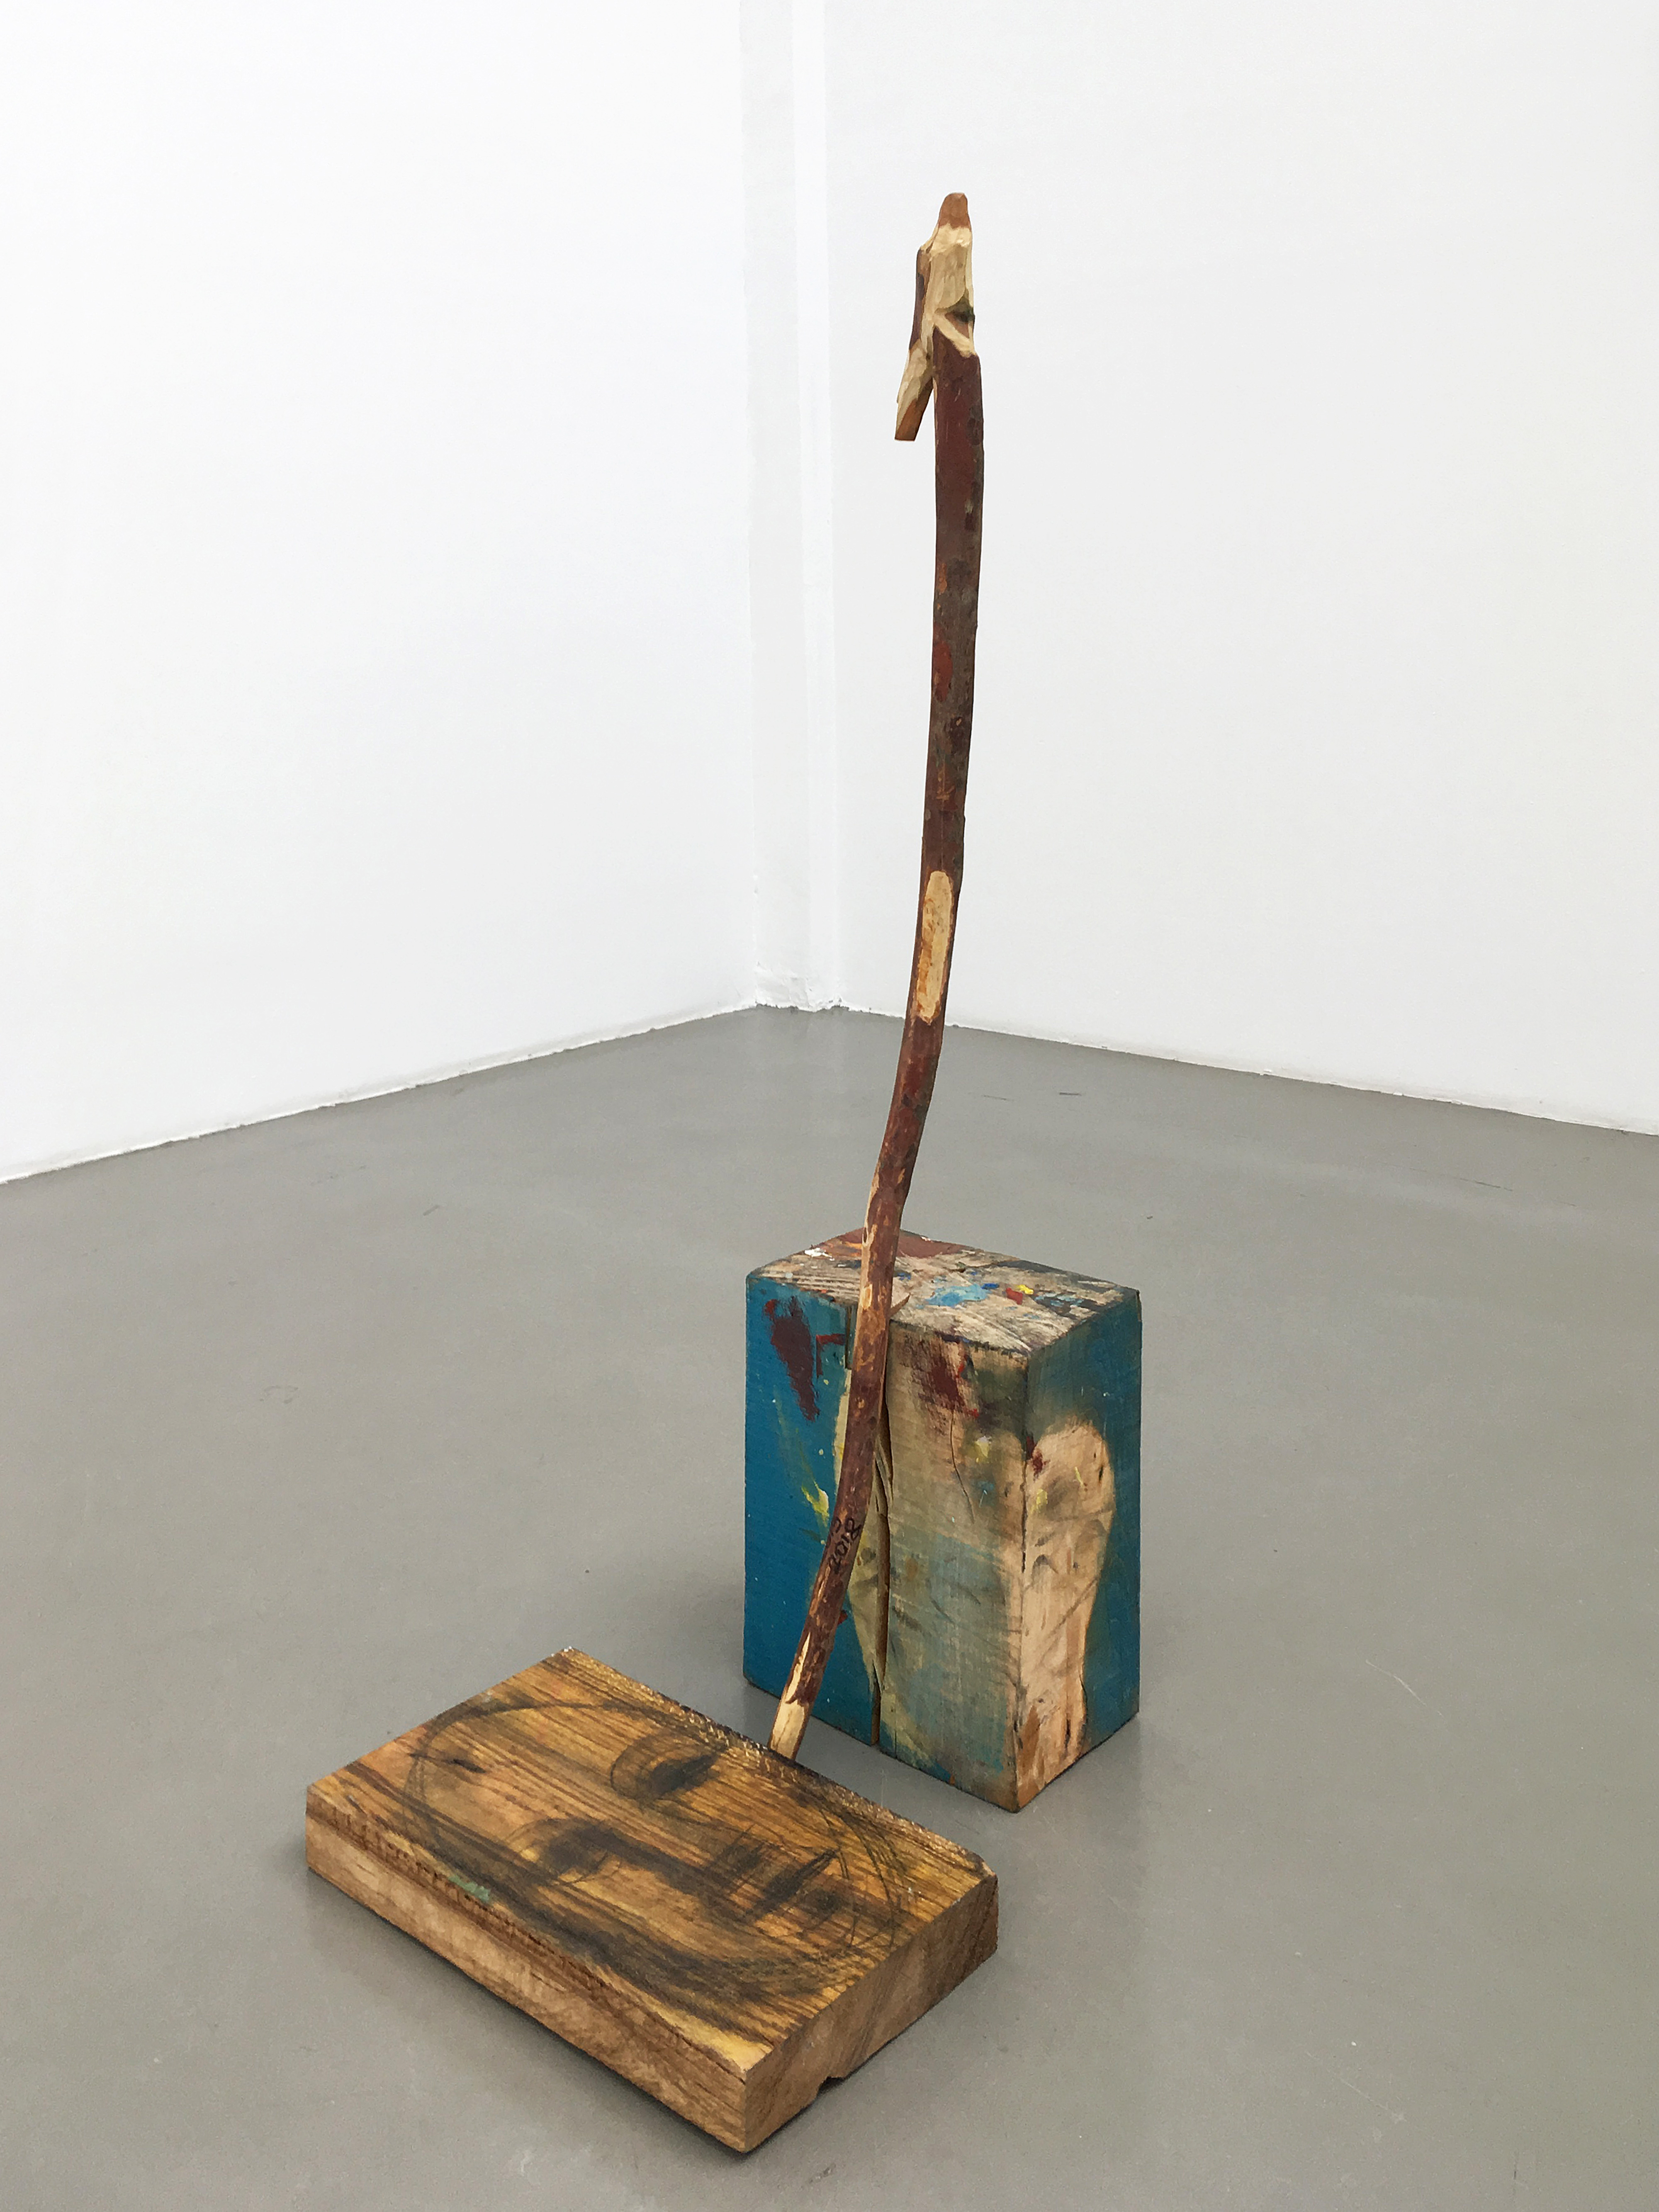 Galerie Barbara Thumm \ Simon Cantemir Hausì -Selbstvermessung (Self-Cartography) \ Untitled (Walking Stick, Cube and Plake) (2018)